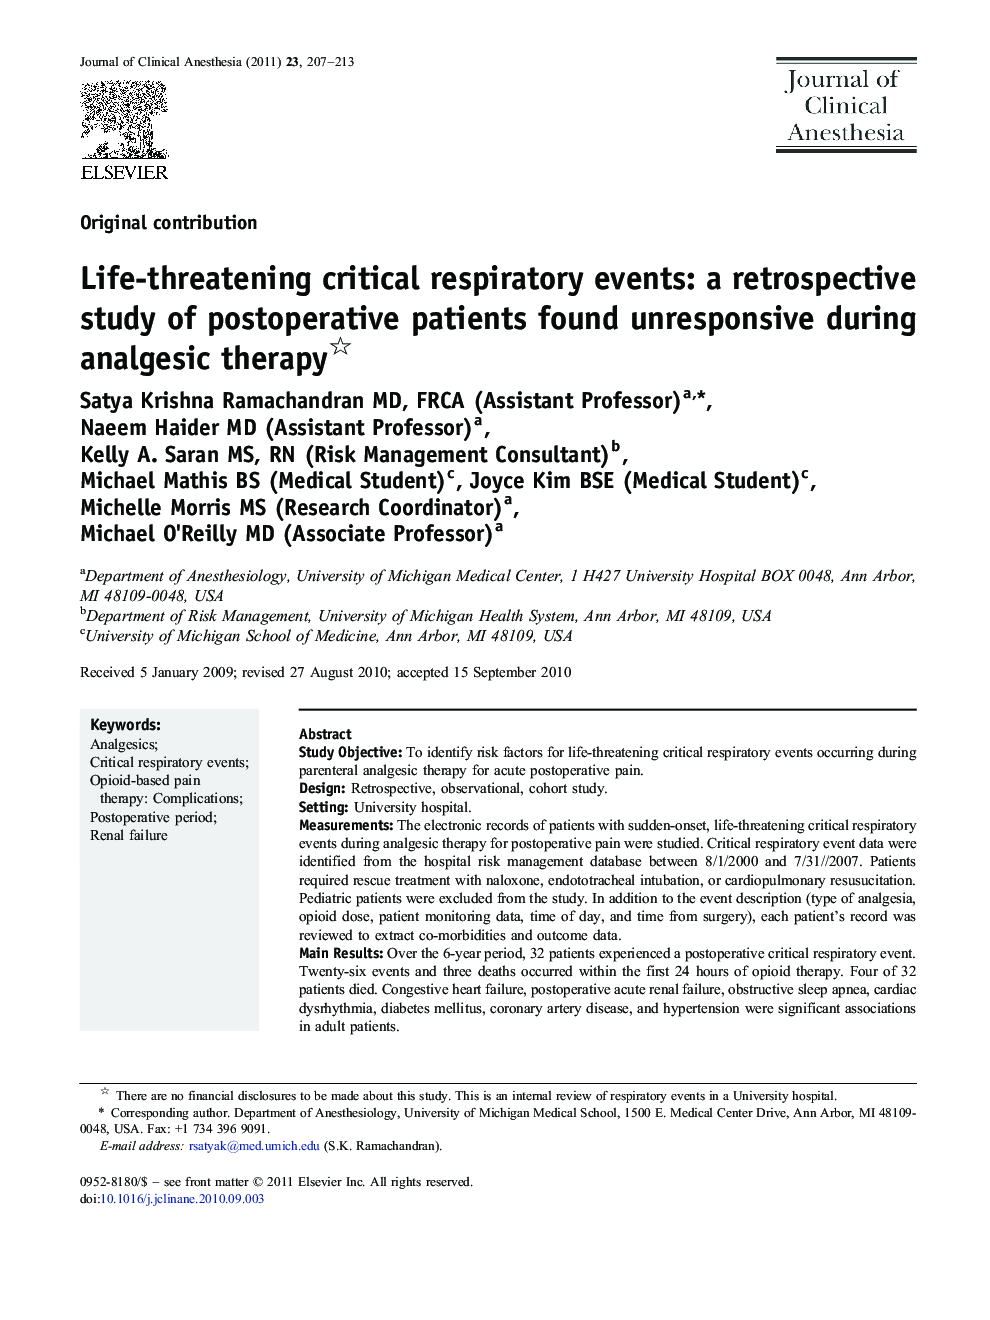 Life-threatening critical respiratory events: a retrospective study of postoperative patients found unresponsive during analgesic therapy 